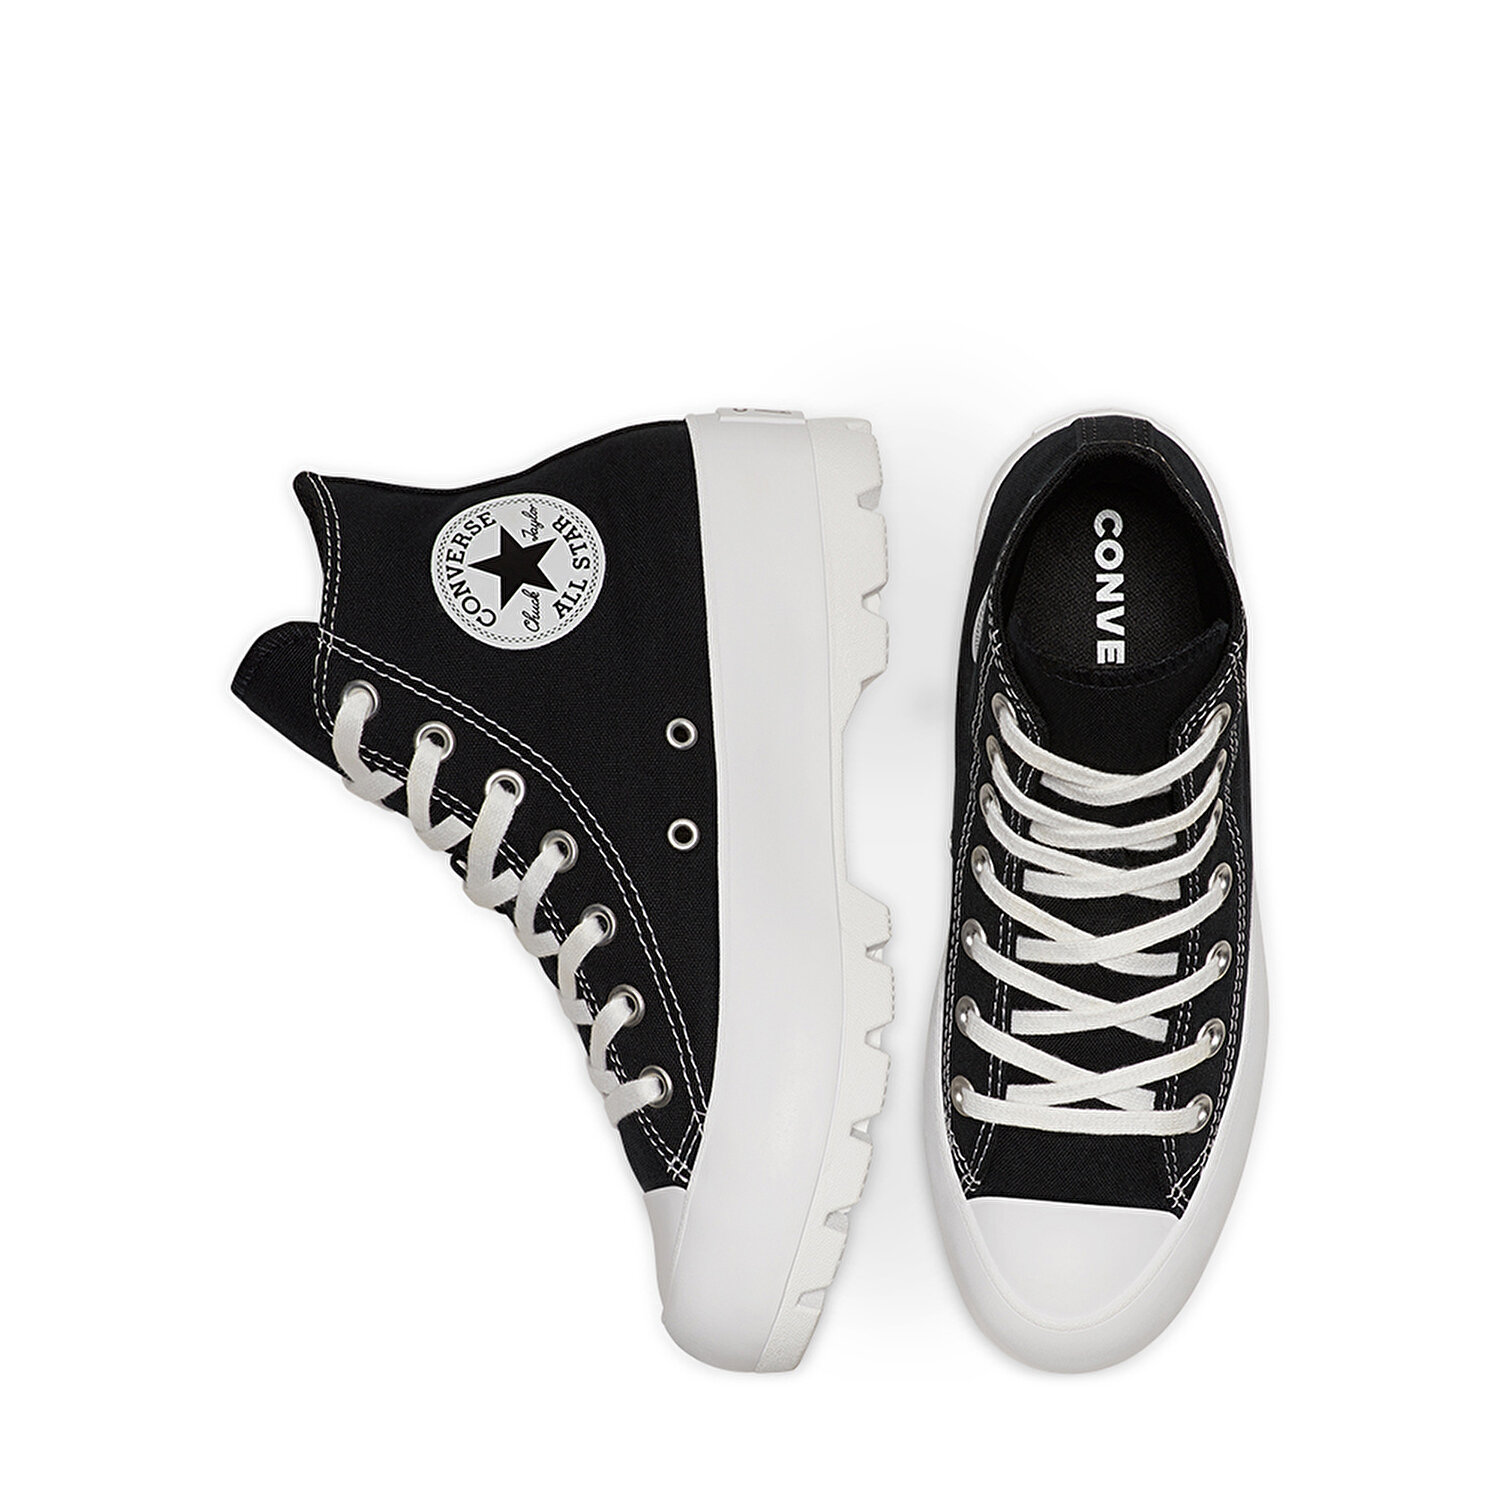 ALL STAR LUGGED CANVAS